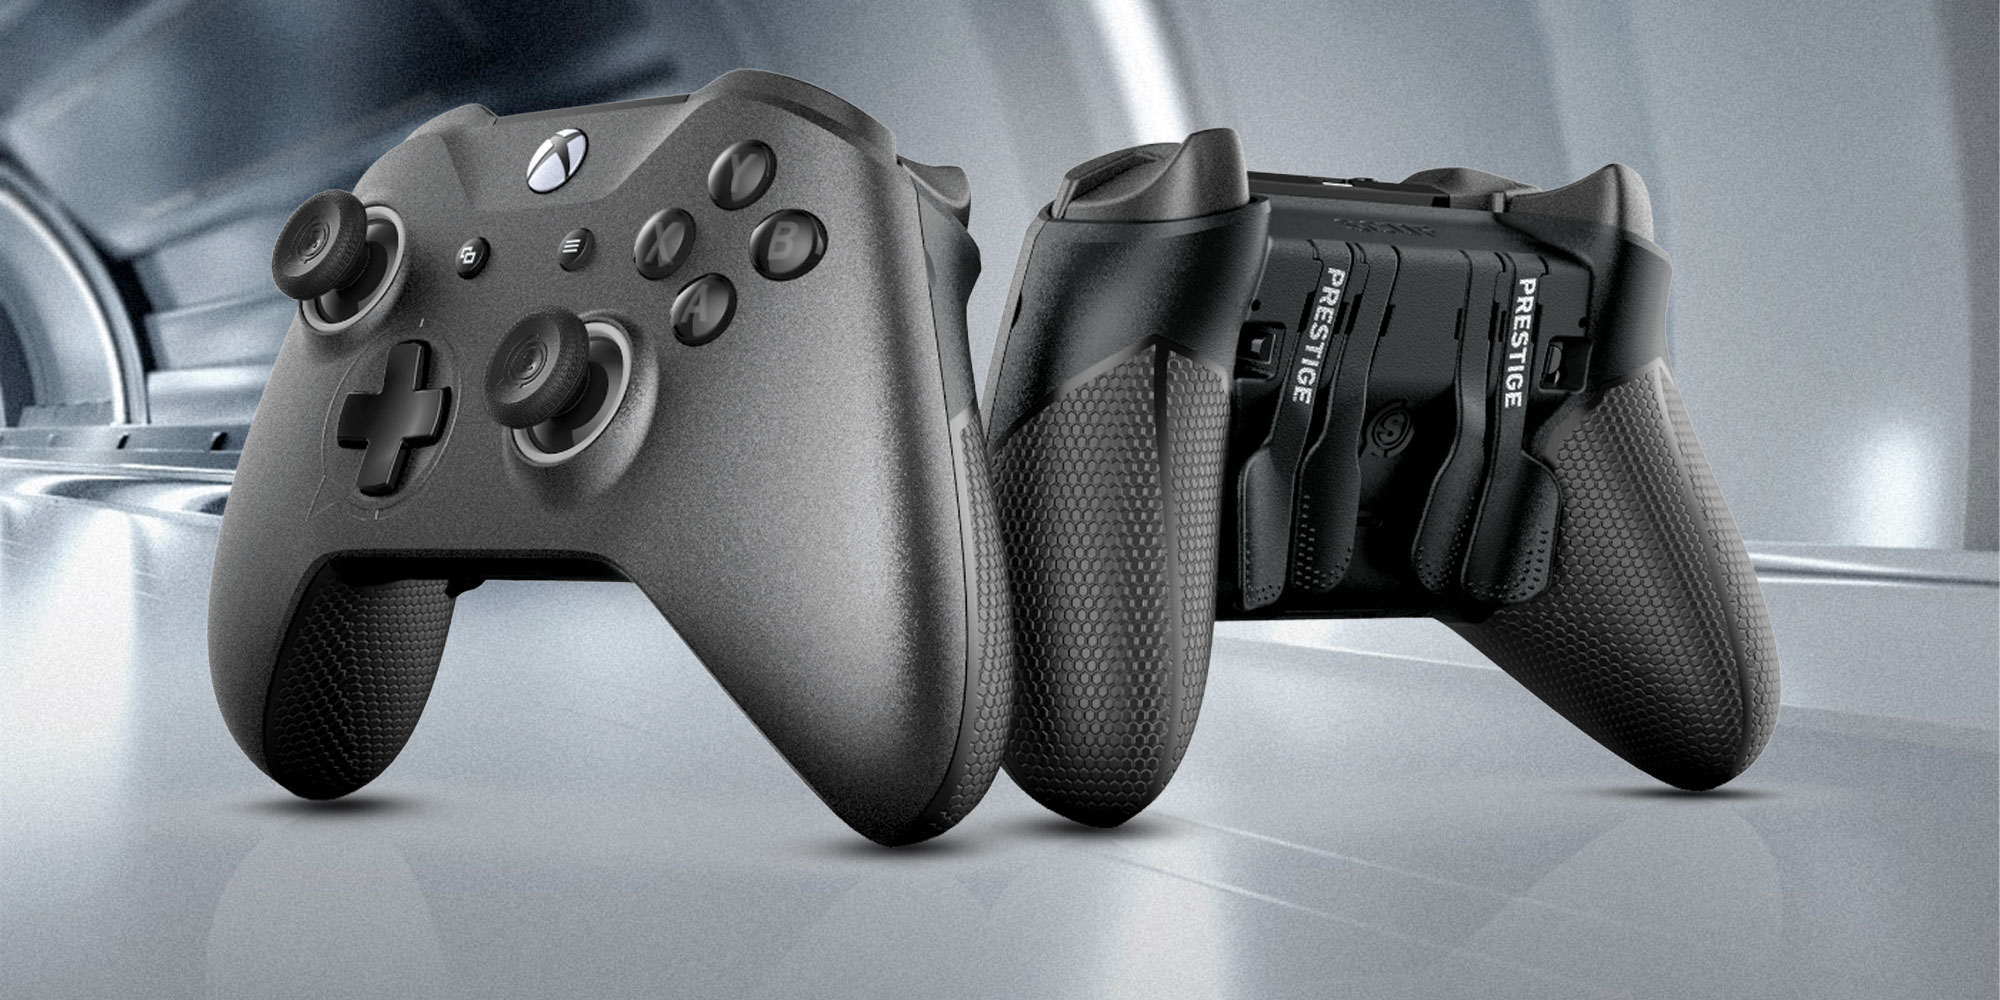 scuf paddles xbox one